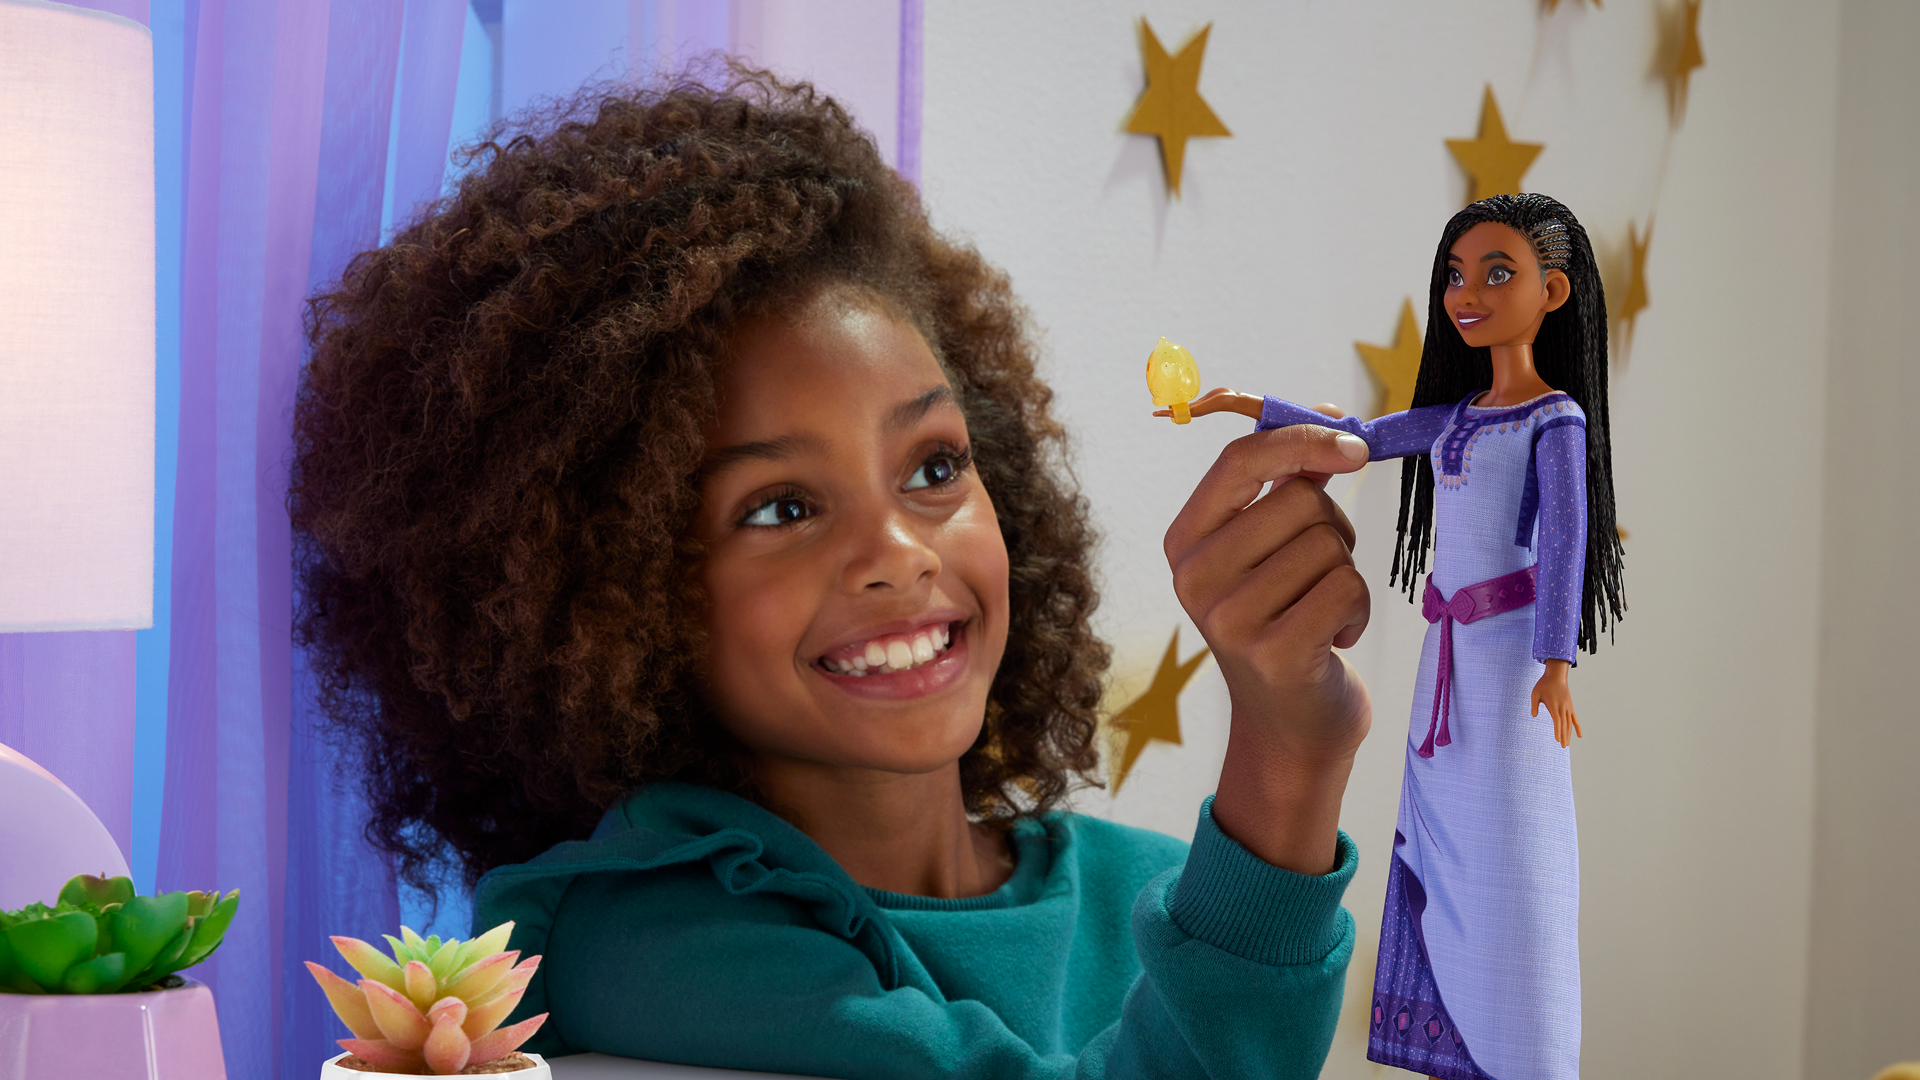 Disney Wish movie 2023 dolls from Mattel - Asha and other characters 